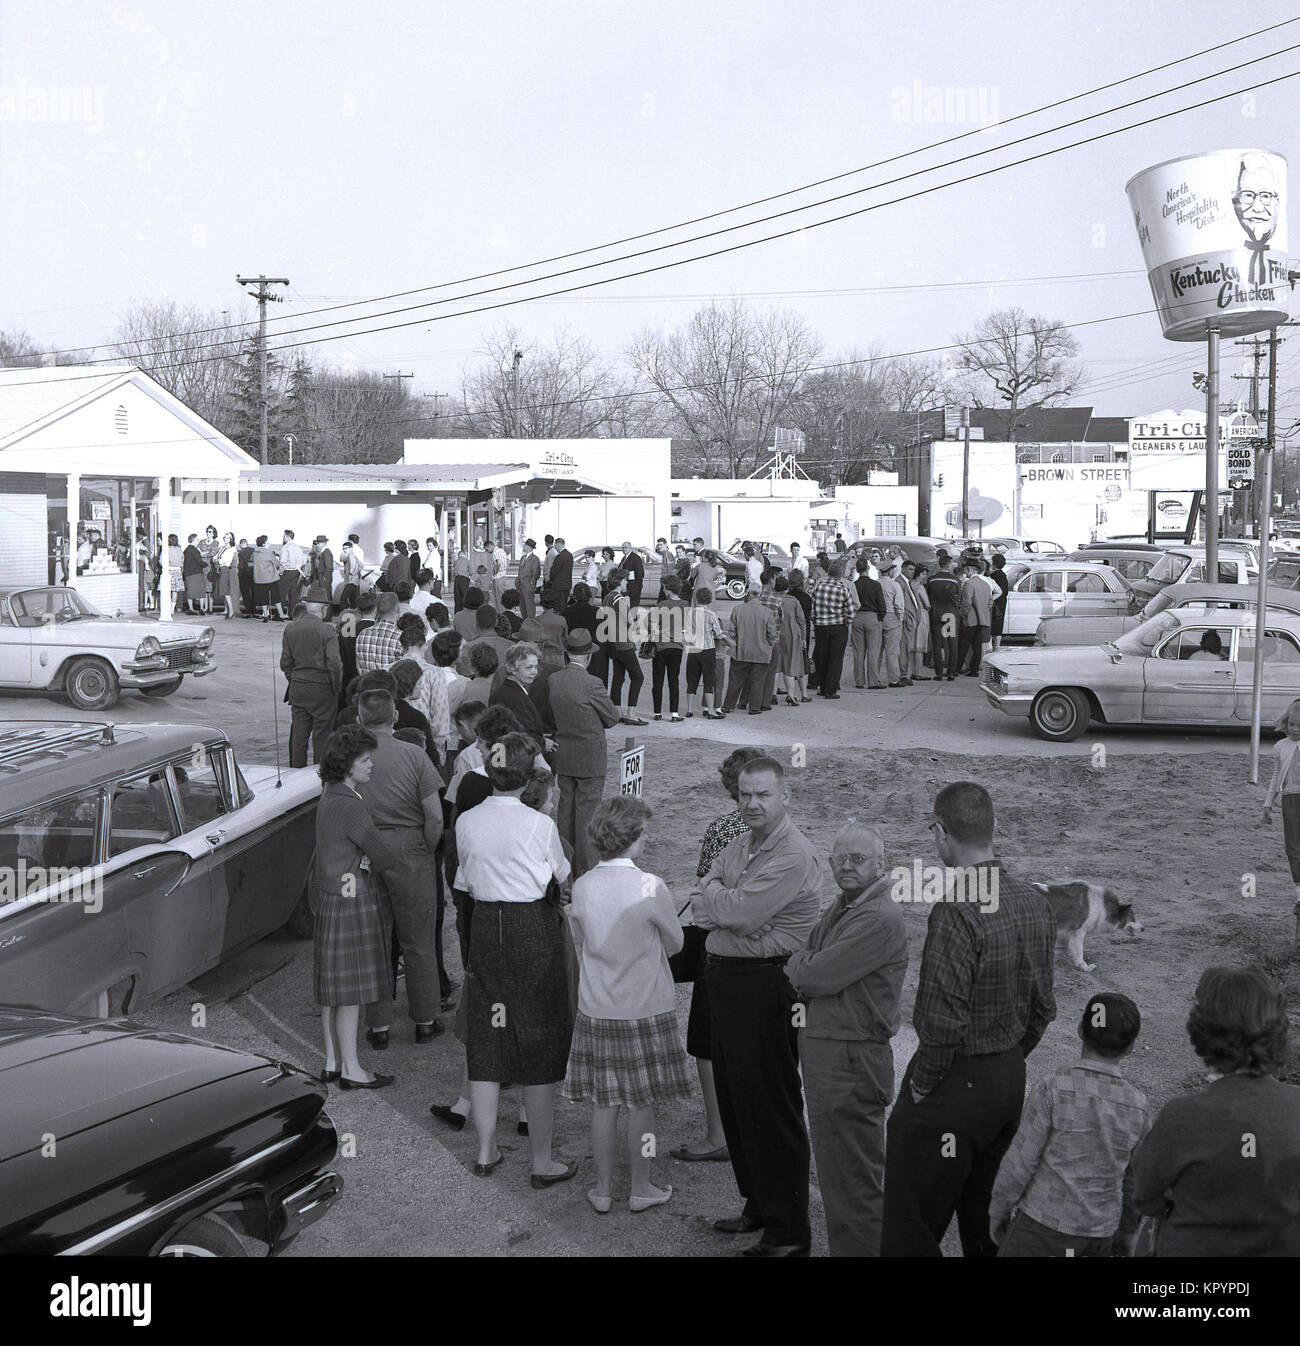 1960s, now that's a long queue...historical picture from this era showing American men and women queuing up outside a Kentucky Fried Chicken fast food outlet in the hope of winning one of the cash prizes on offer inside the store, USA. Stock Photo